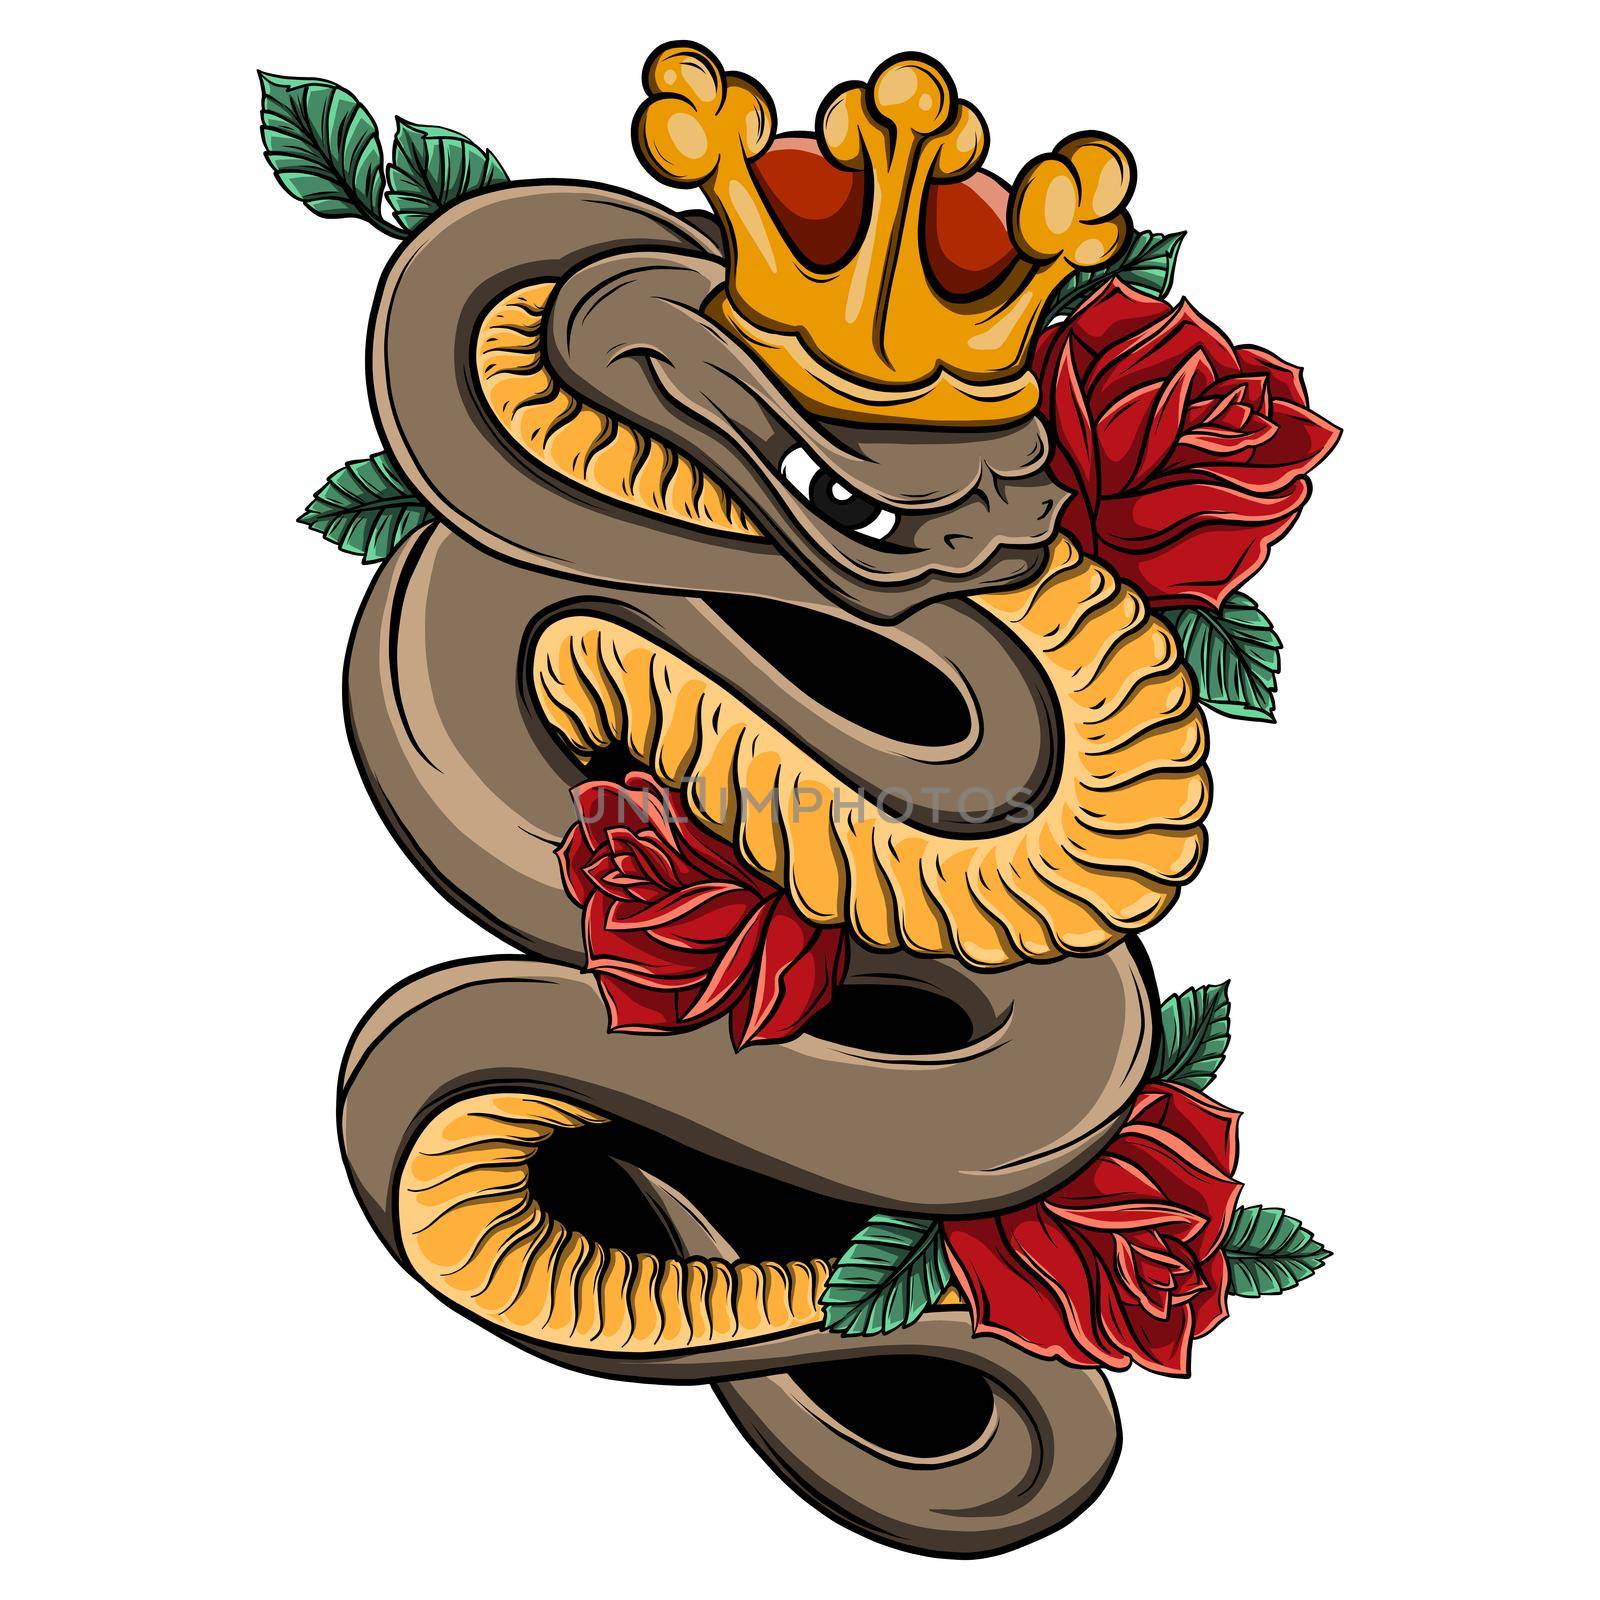 Ink and pen drawing, snake and roses